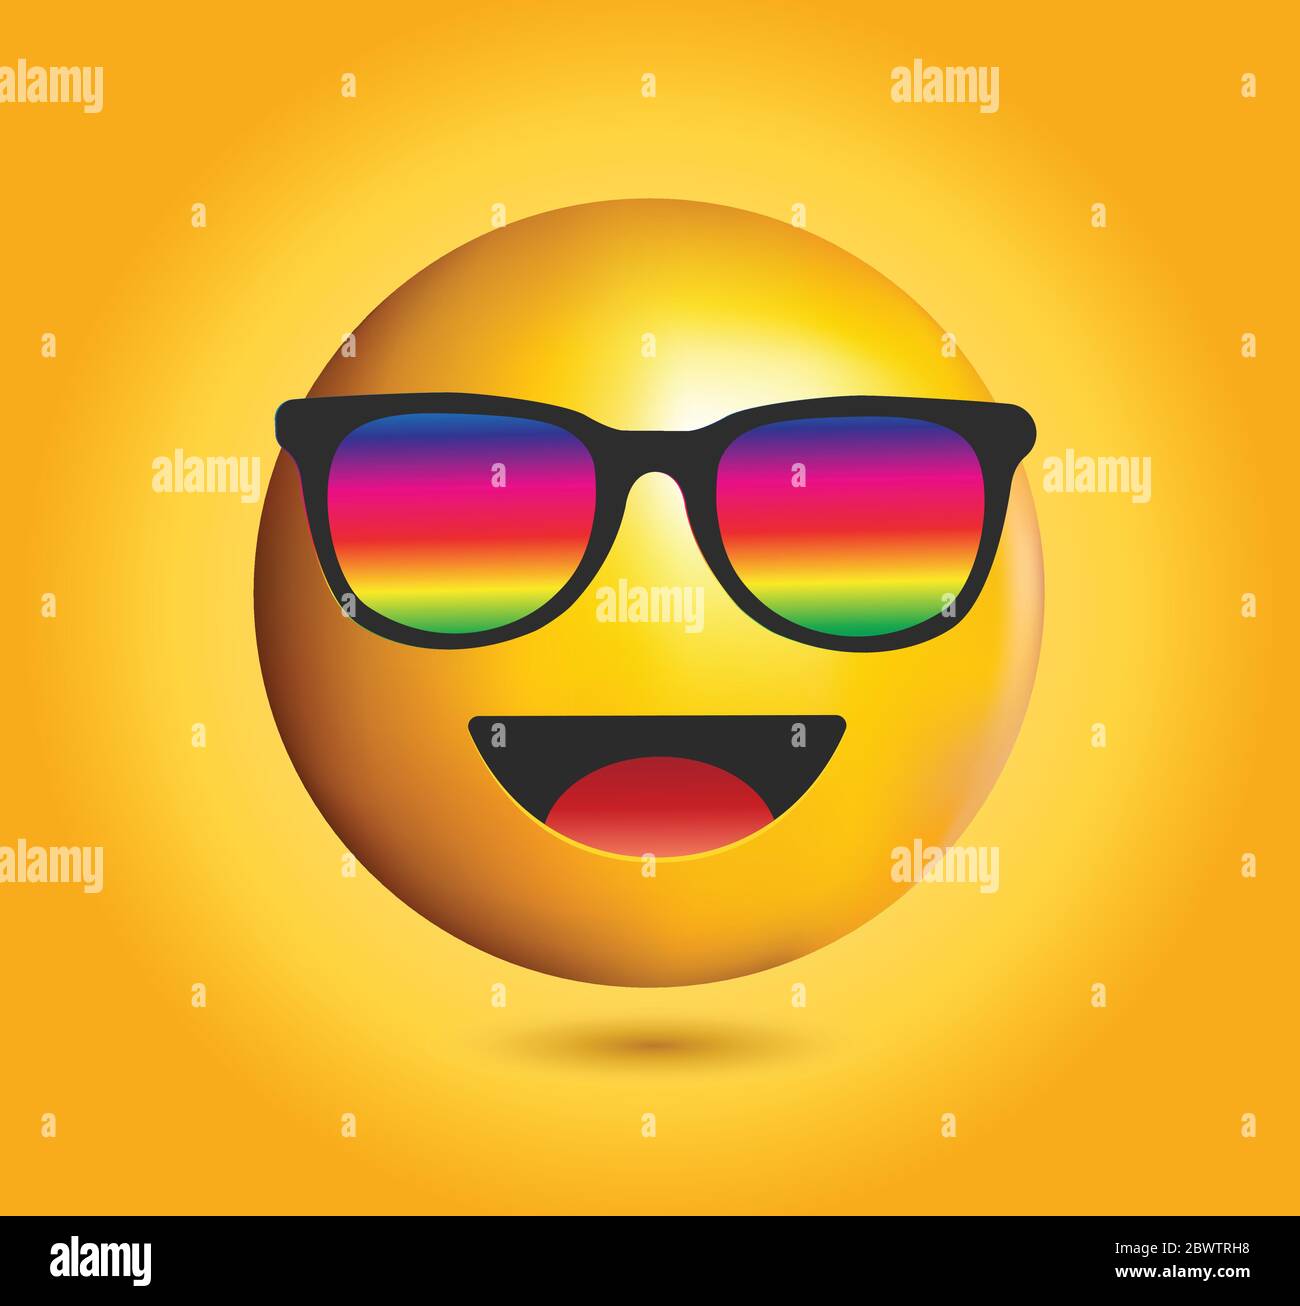 High Quality Emoticon With Sunglasses Emoji Vector Cool Smiling Face With Rainbow Sunglasses Vector Illustration Yellow Face With Sunglasses Stock Vector Image Art Alamy